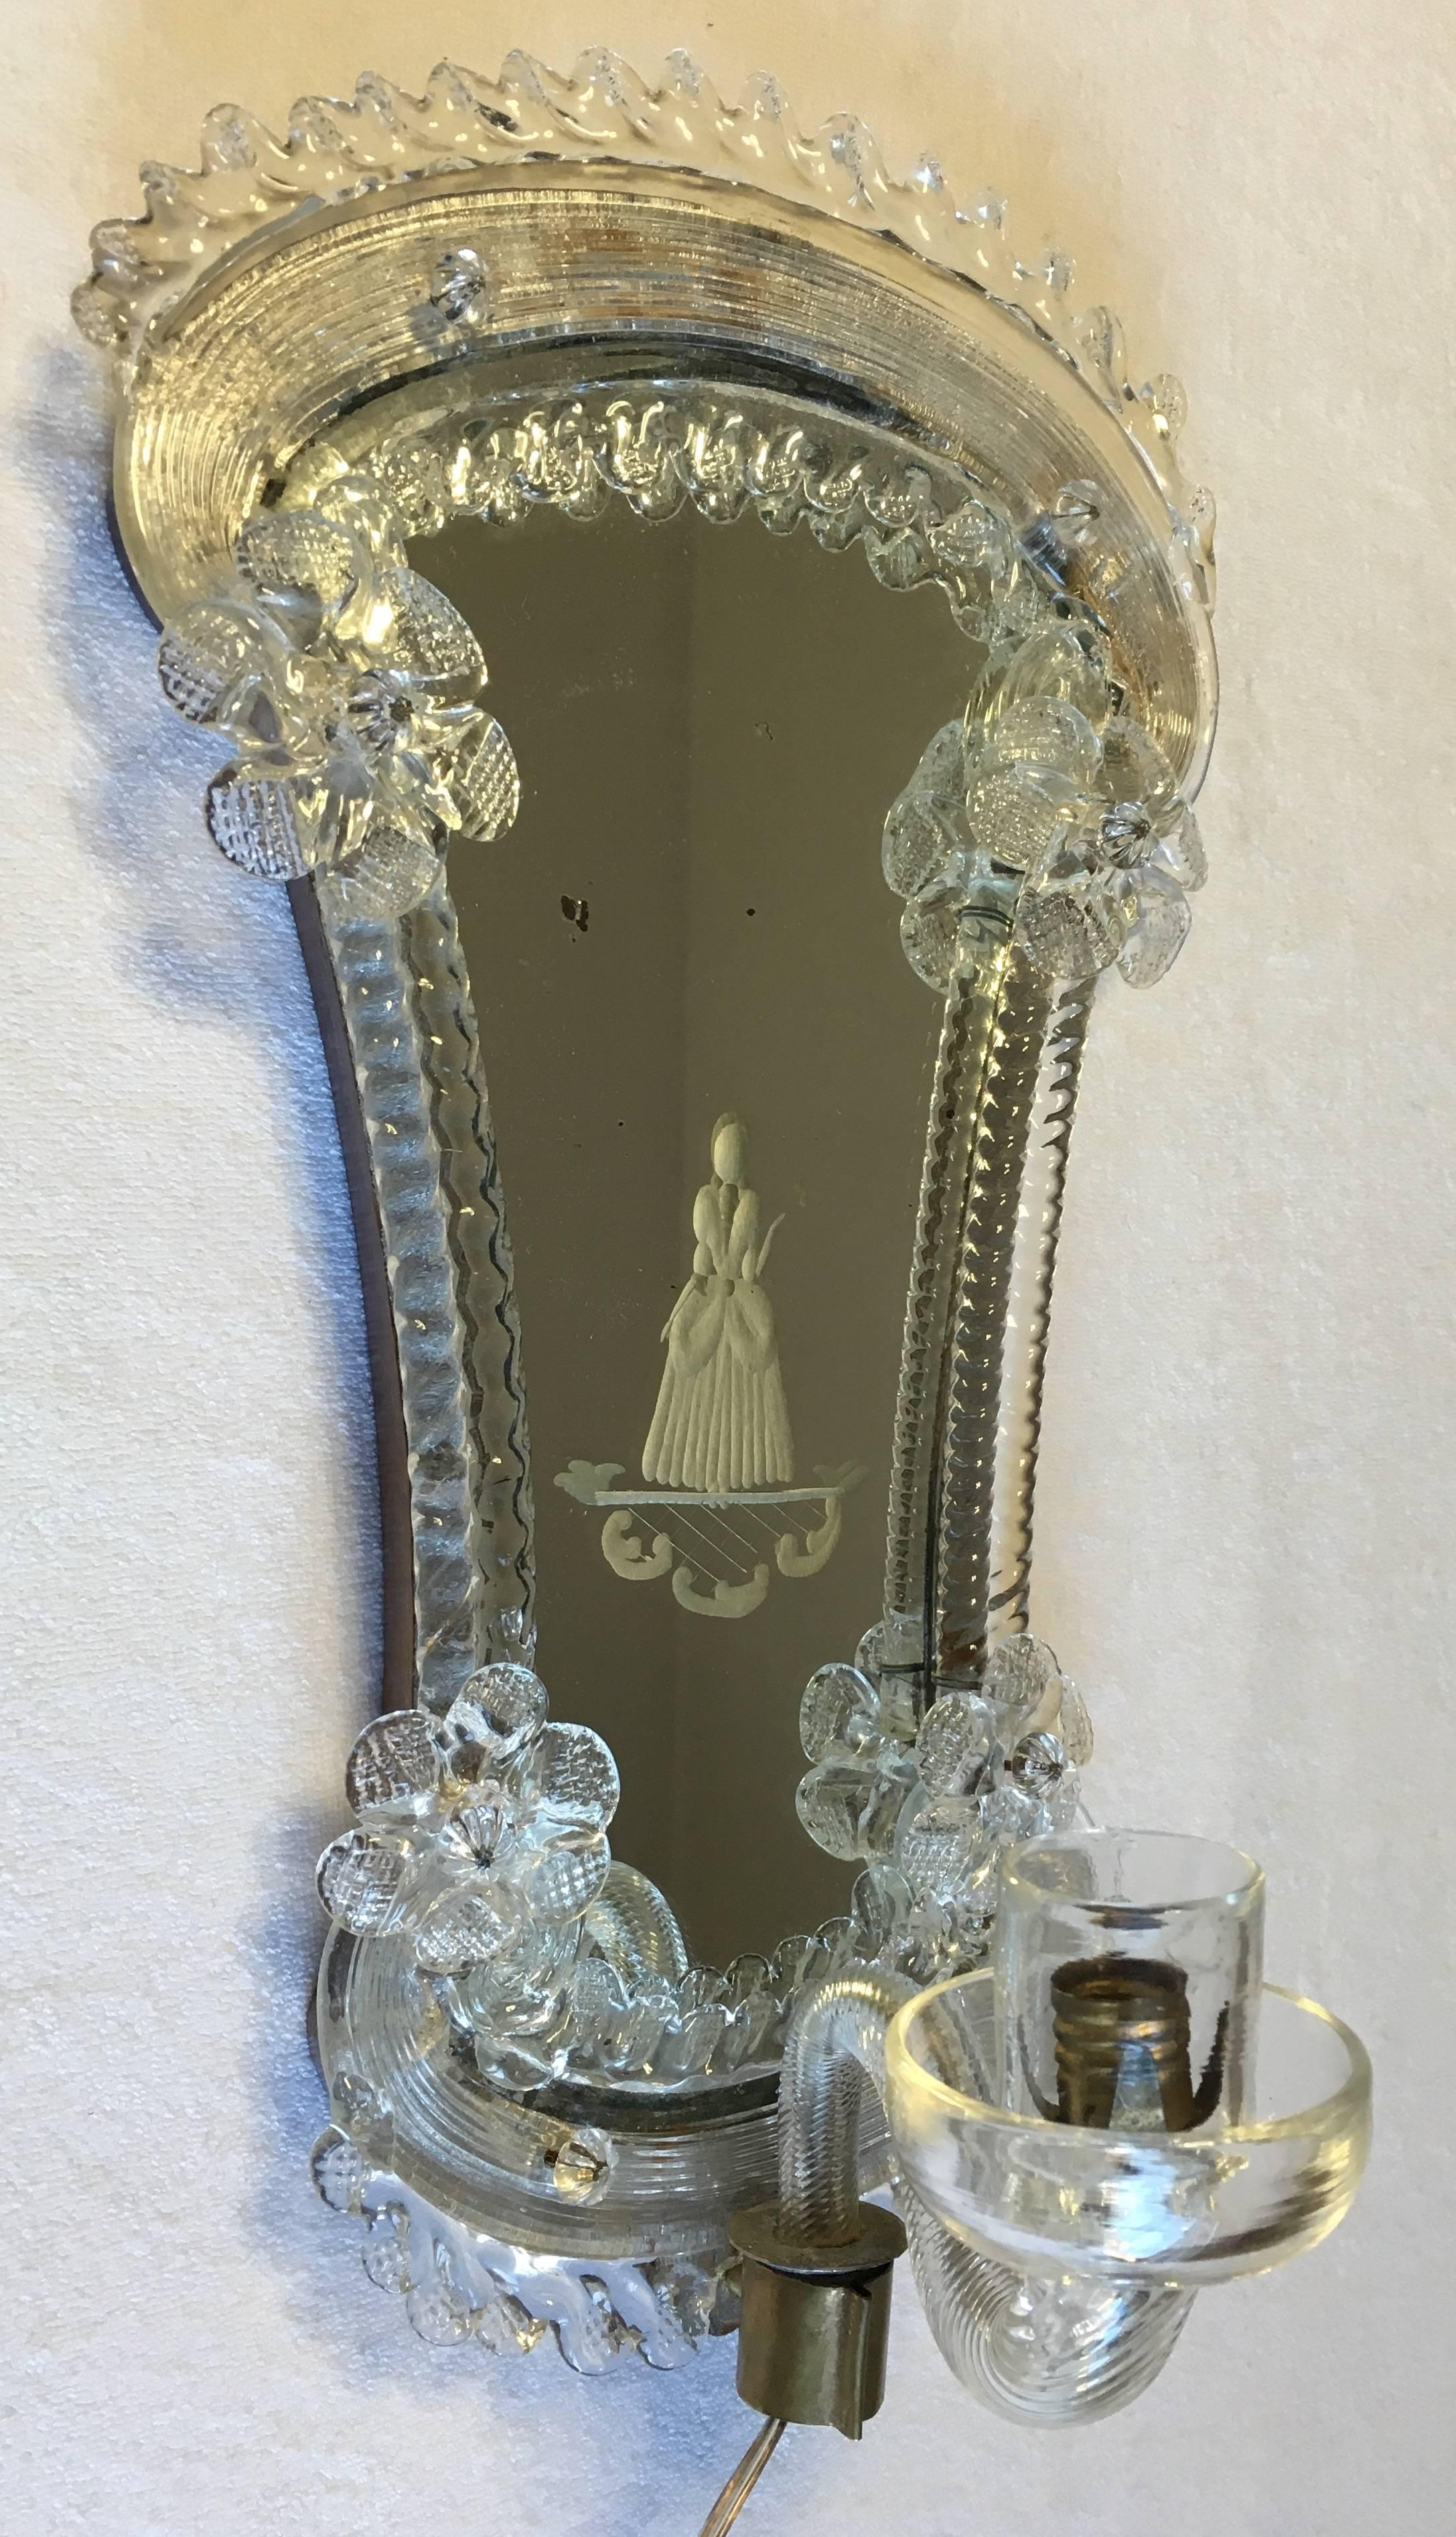 Two romantic Italian wall lights of Venetian glass with mirror and etched figurines.
A curved arm holds a single light bulb.